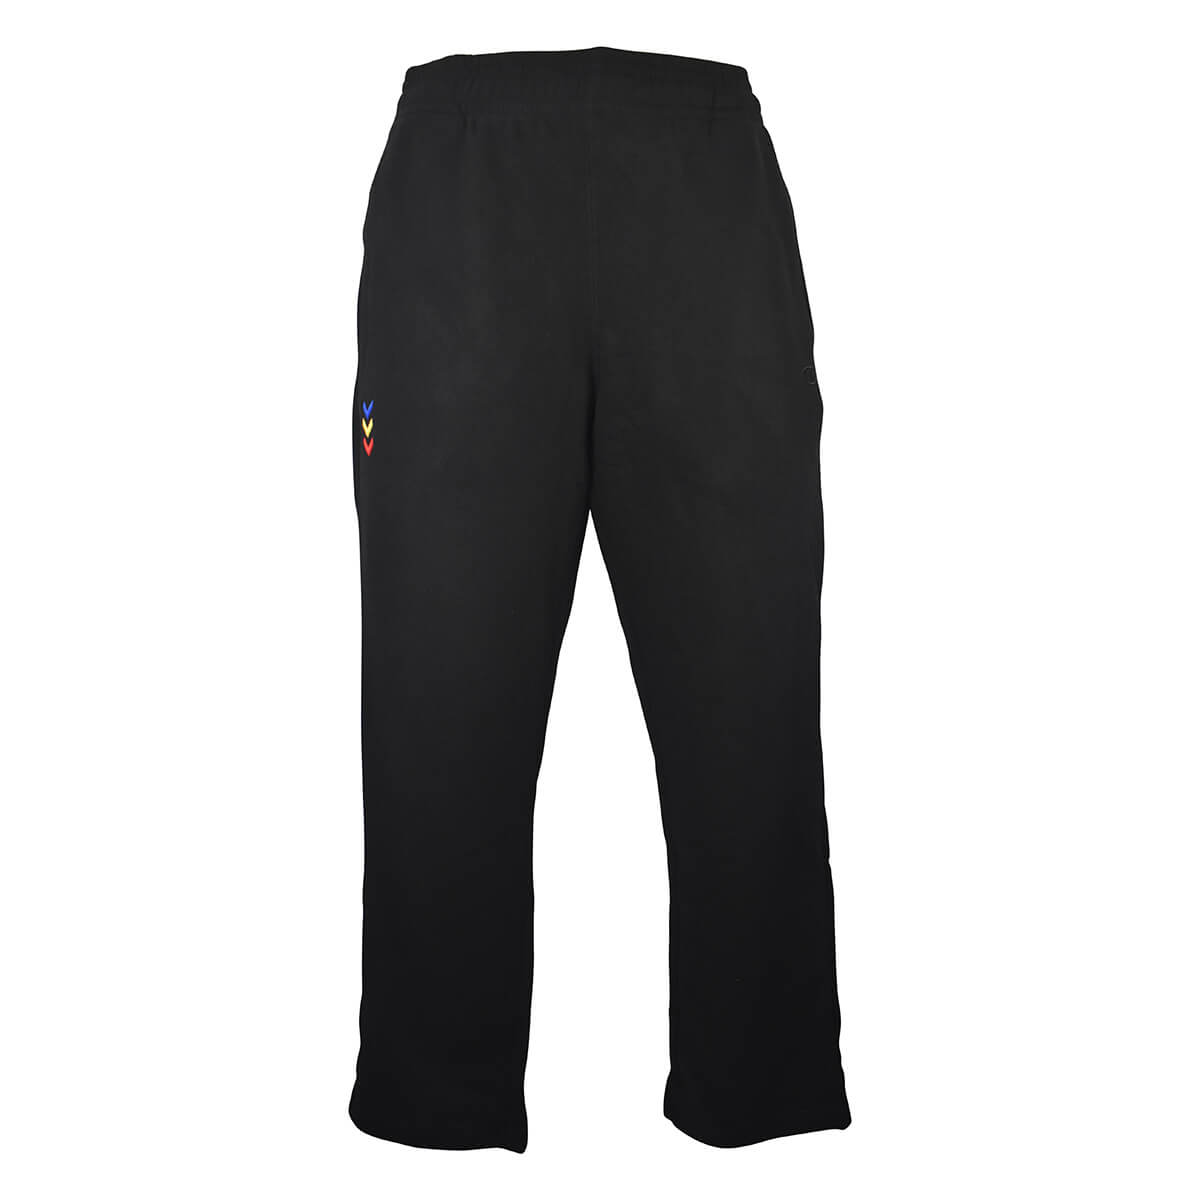 Hume Dance Boys Track Pant | Hume Anglican Grammar | Noone